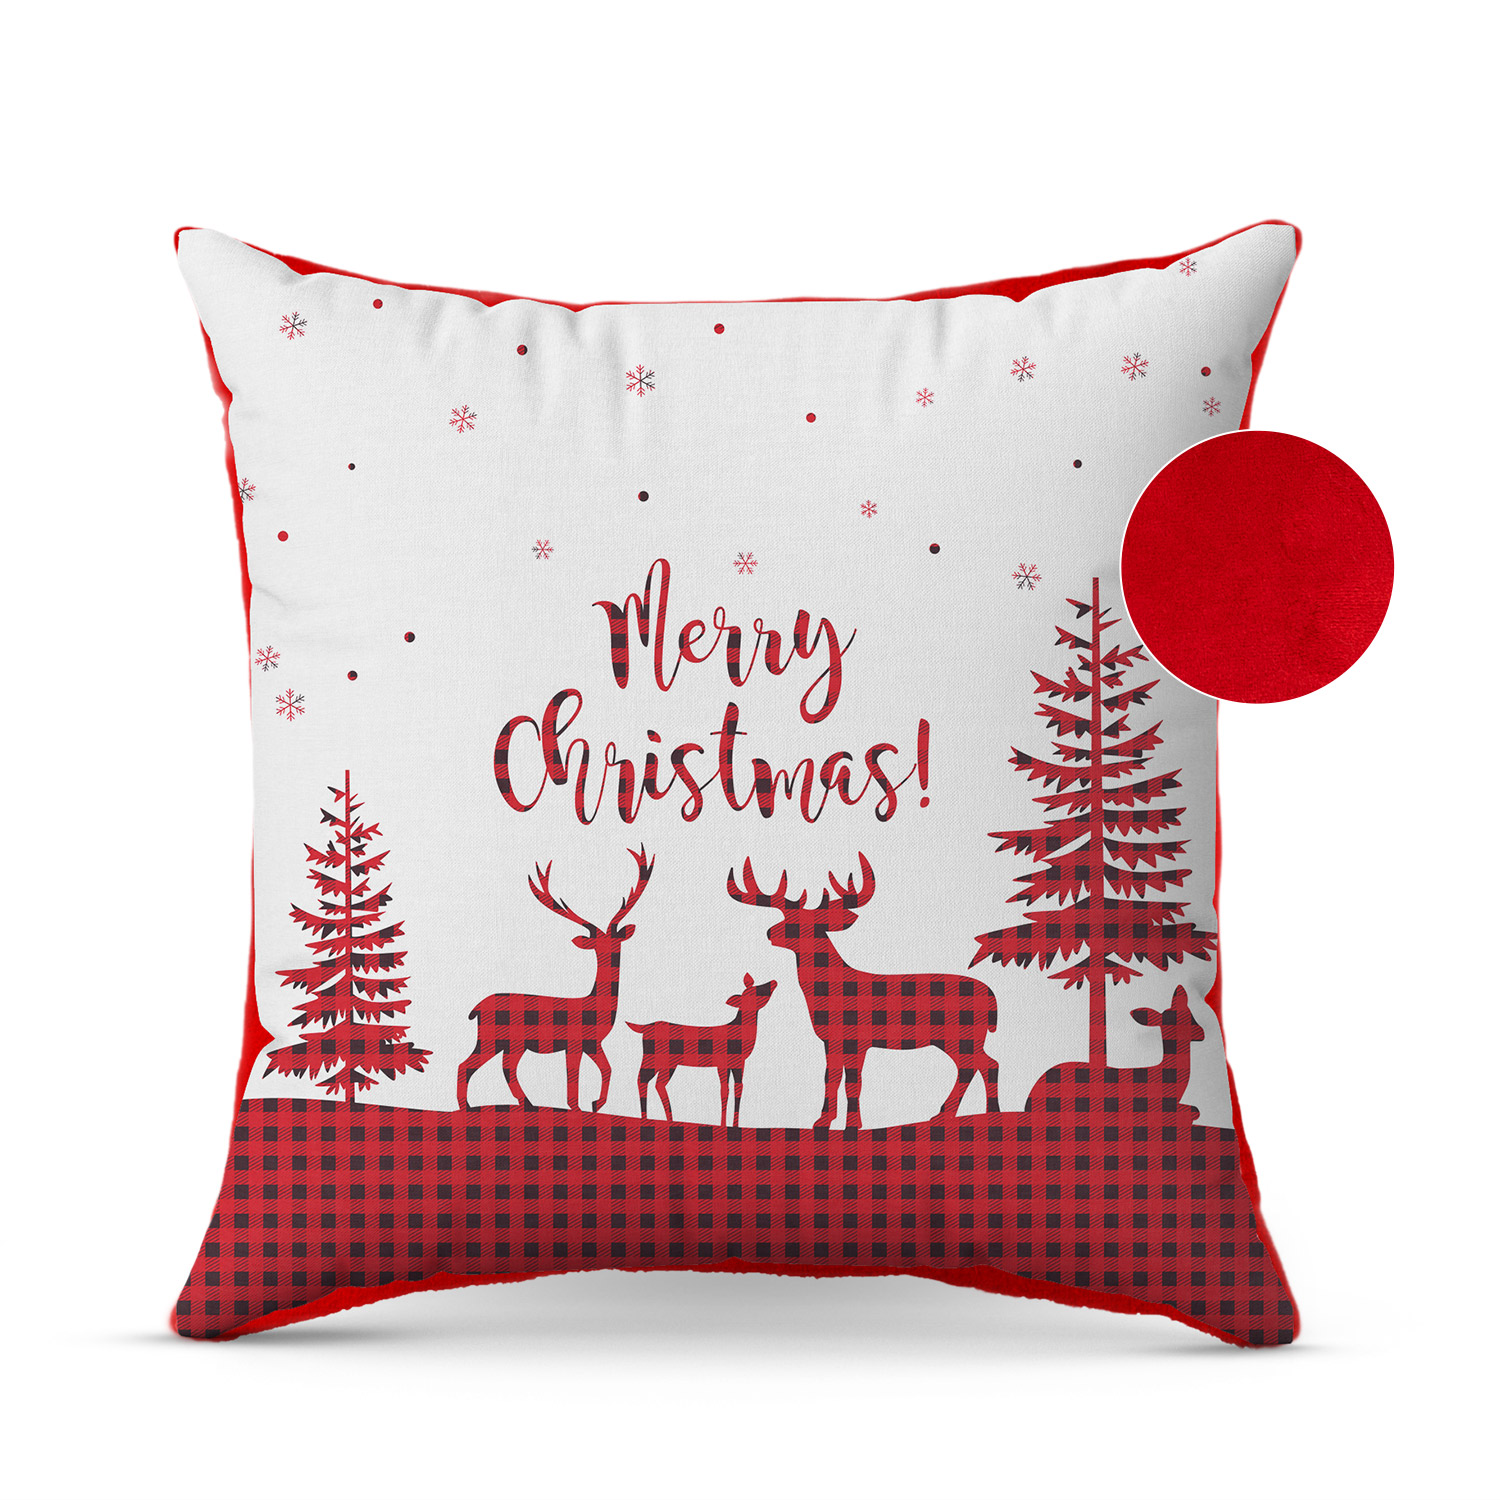 Christmas pillow with deers